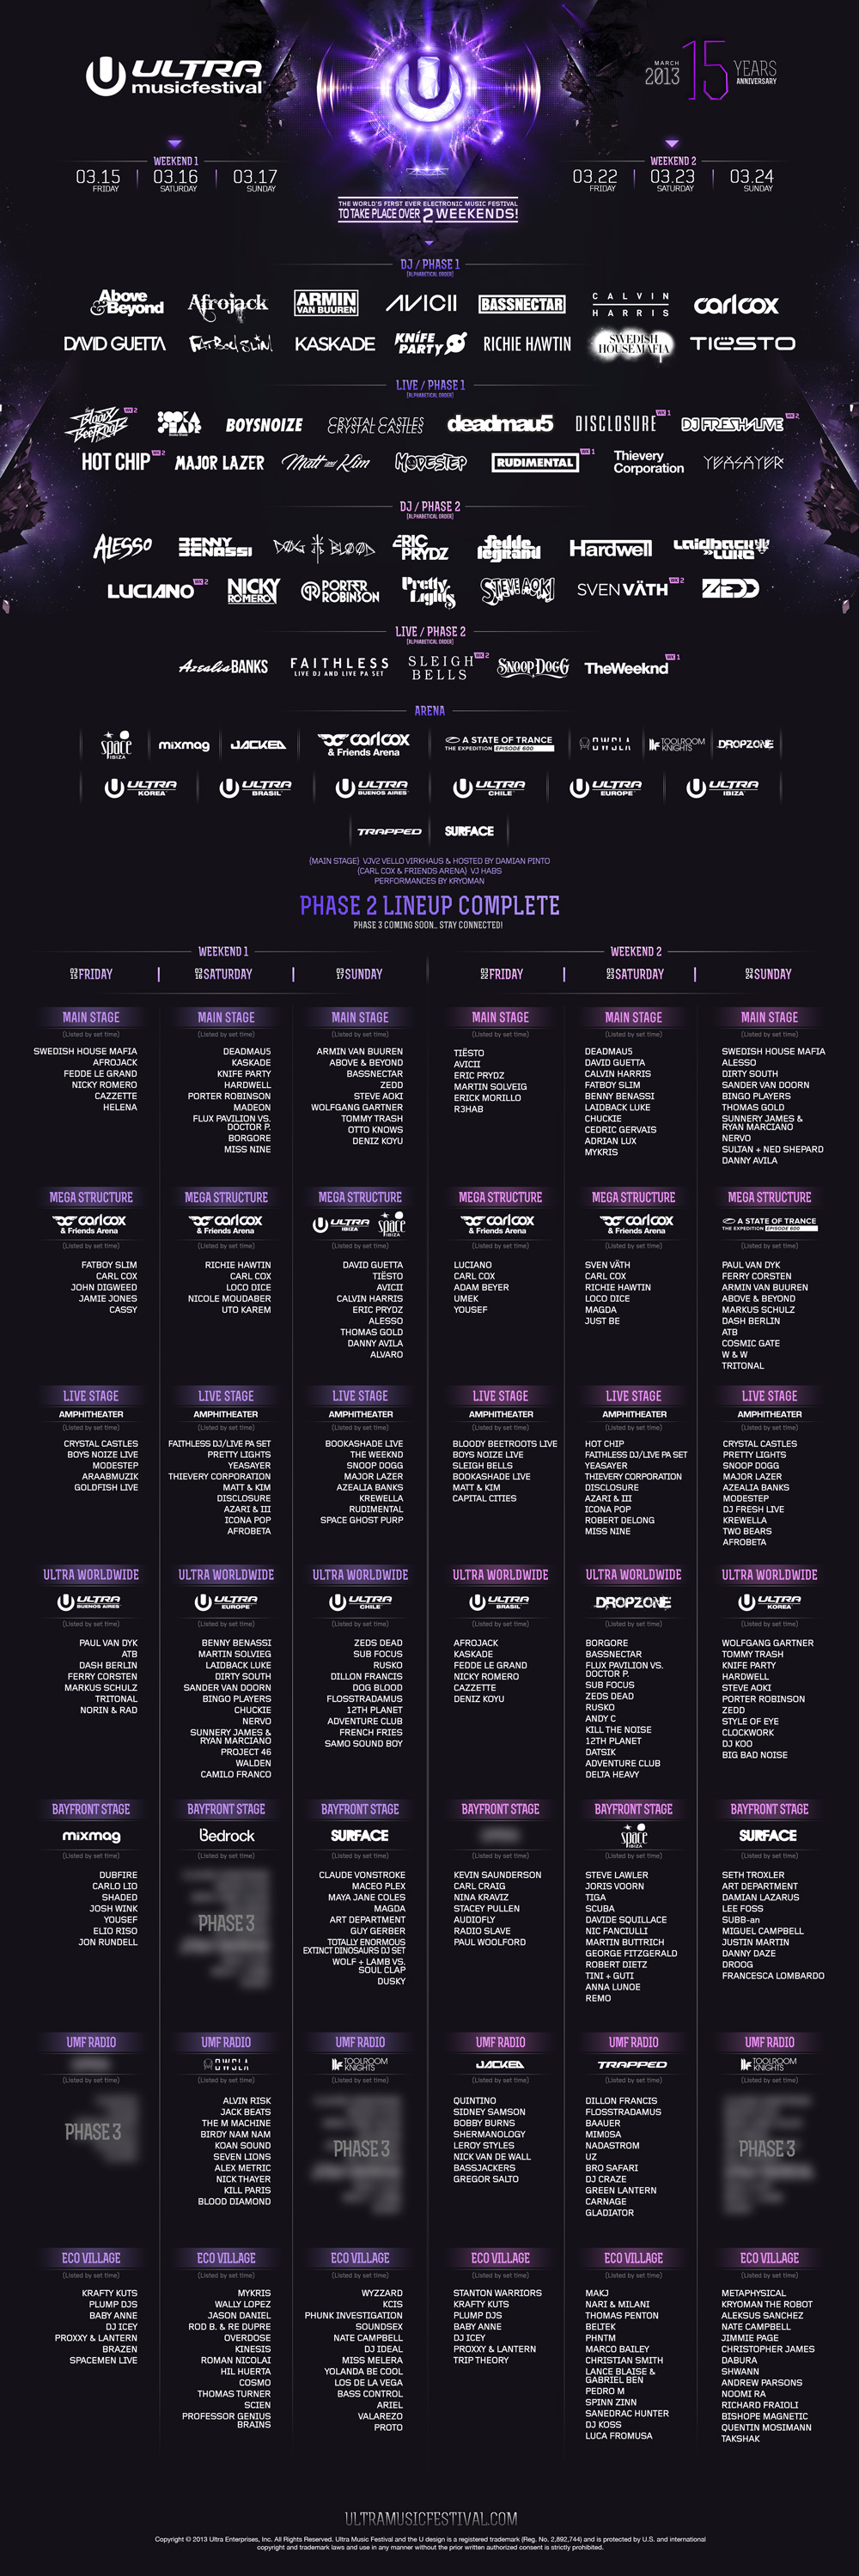 complete lineup and stage schedule for Ultra 2013 in miami